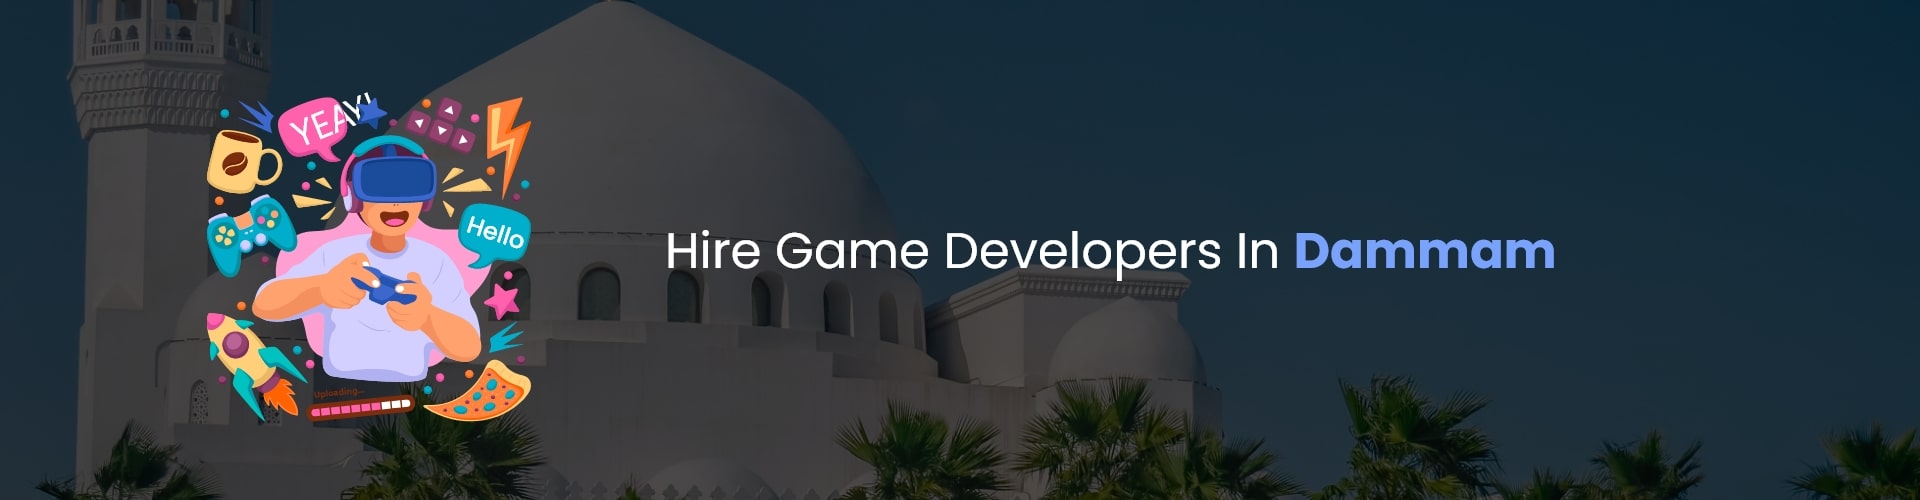 hire game developers in dammam